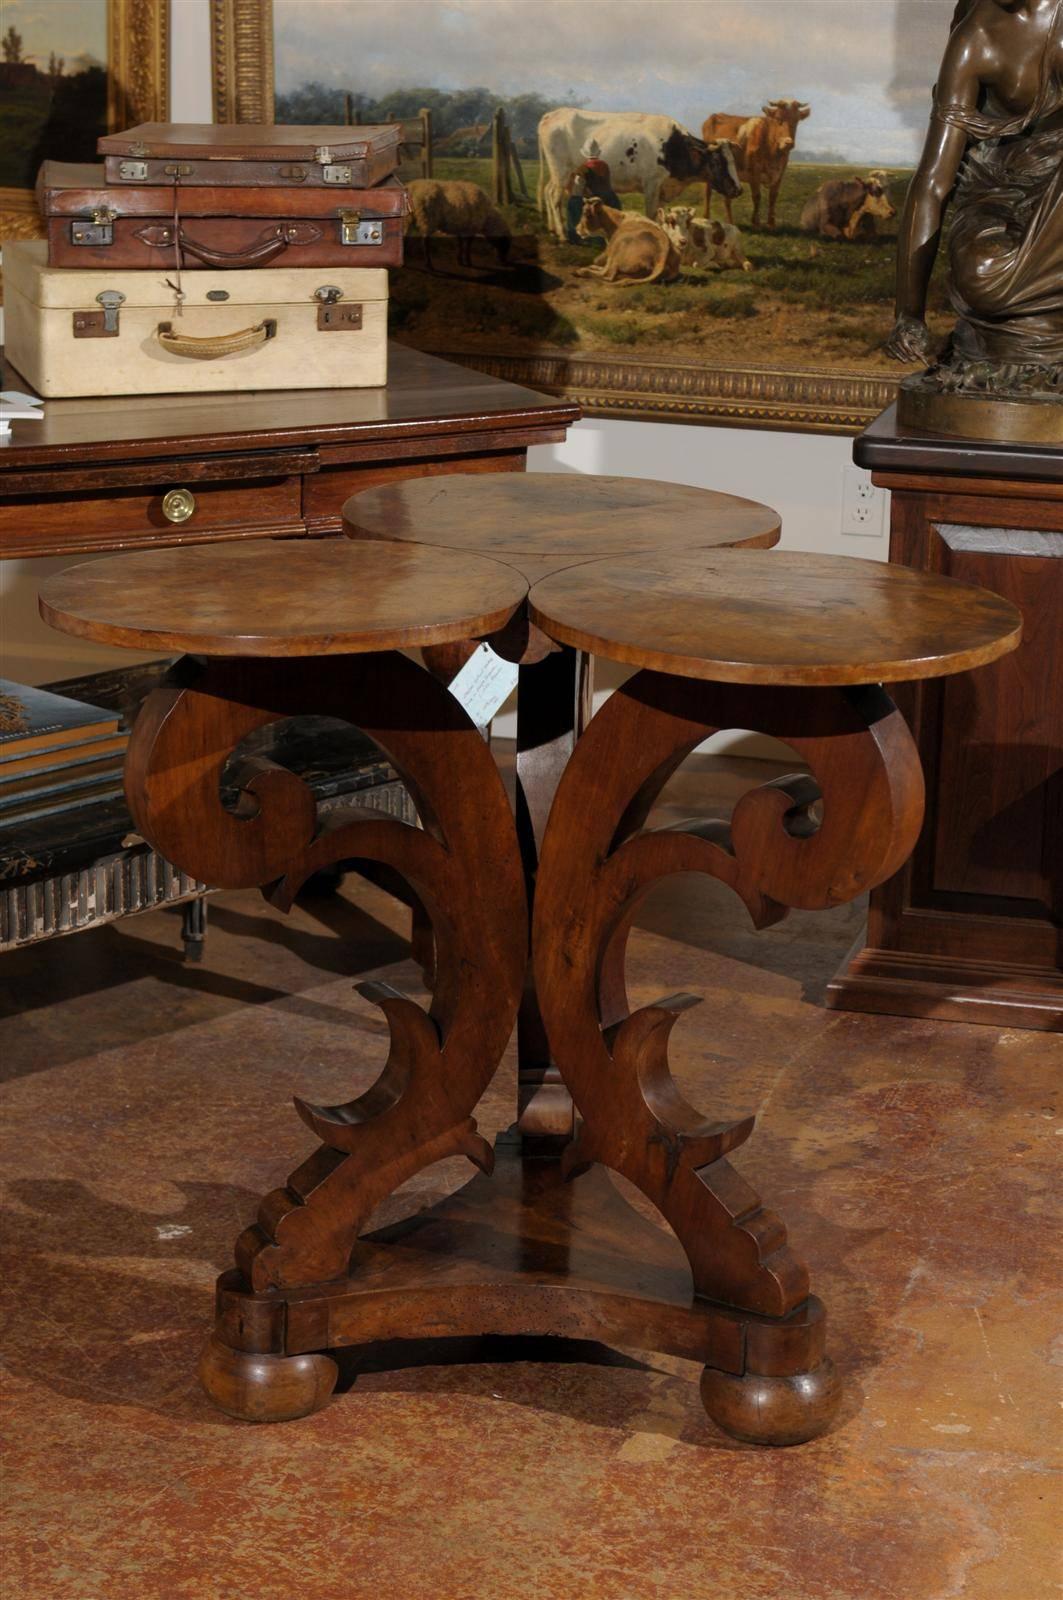 Late 19th to early 20th century Italian carved walnut table with triple circular top raised on a gracefully carved tripod base ending in a single stretcher and squat feet.